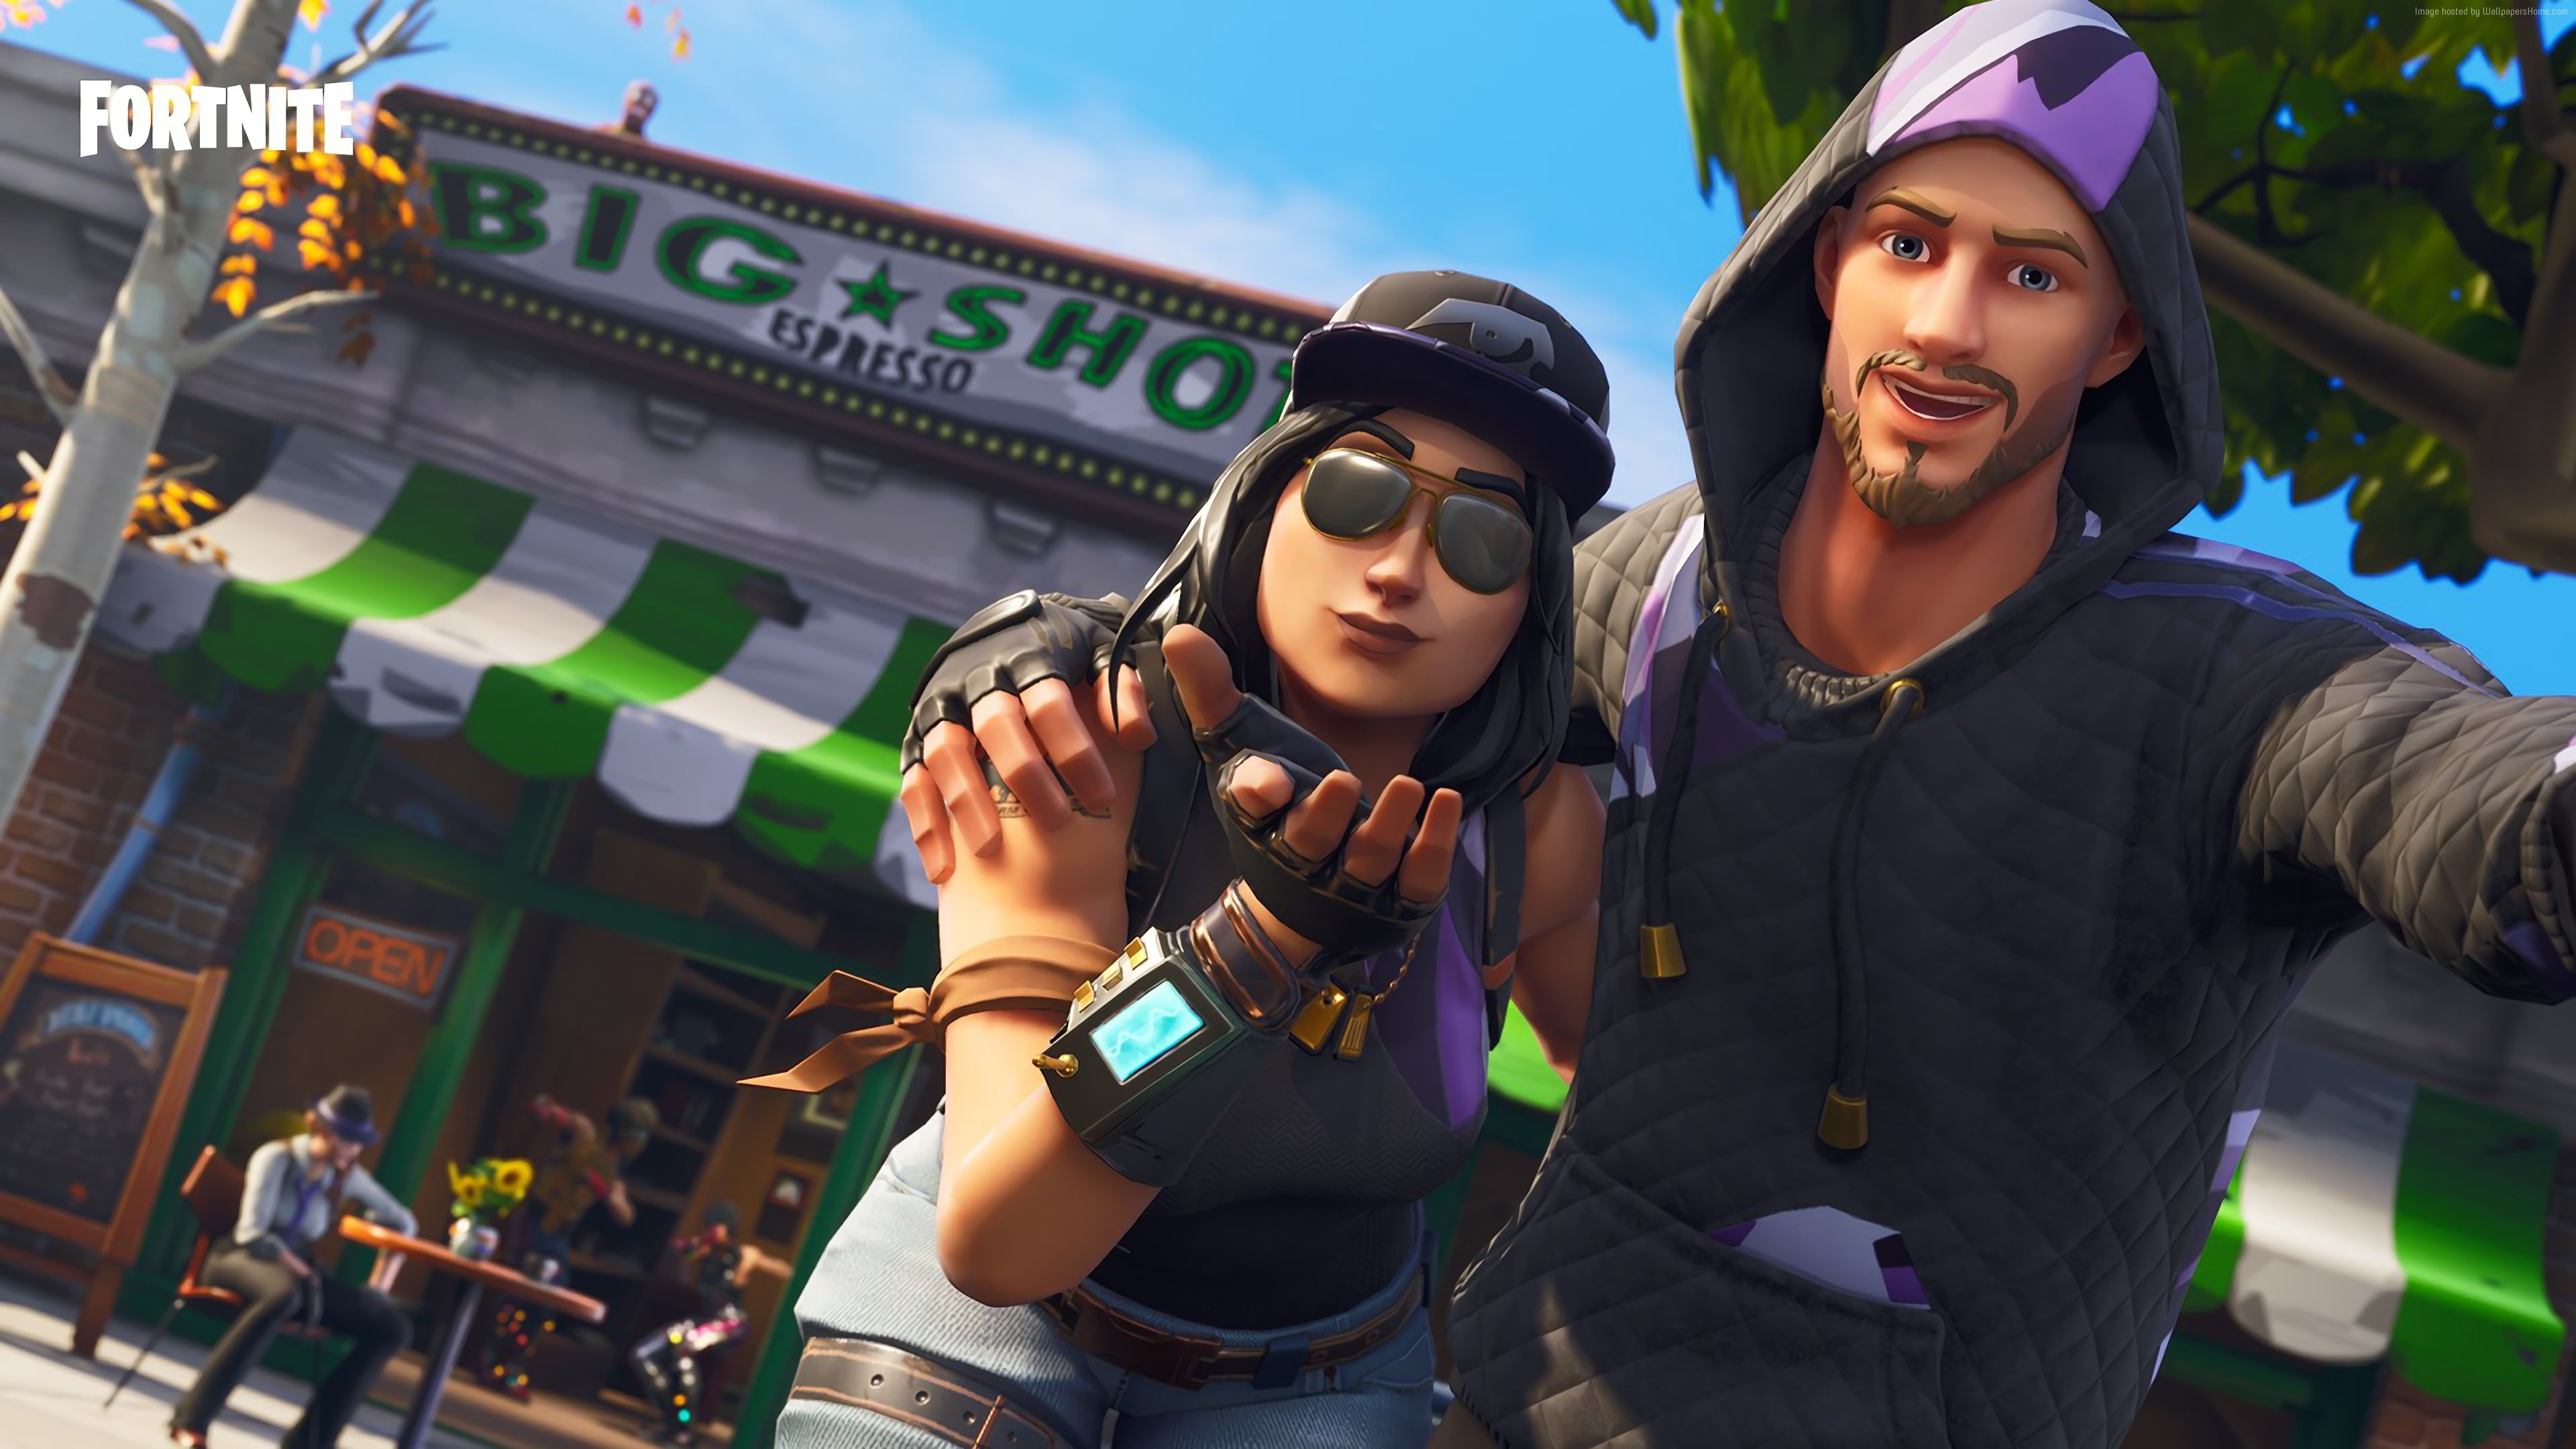 screenshot, 4K, Fortnite, young adult, real people, leisure activity